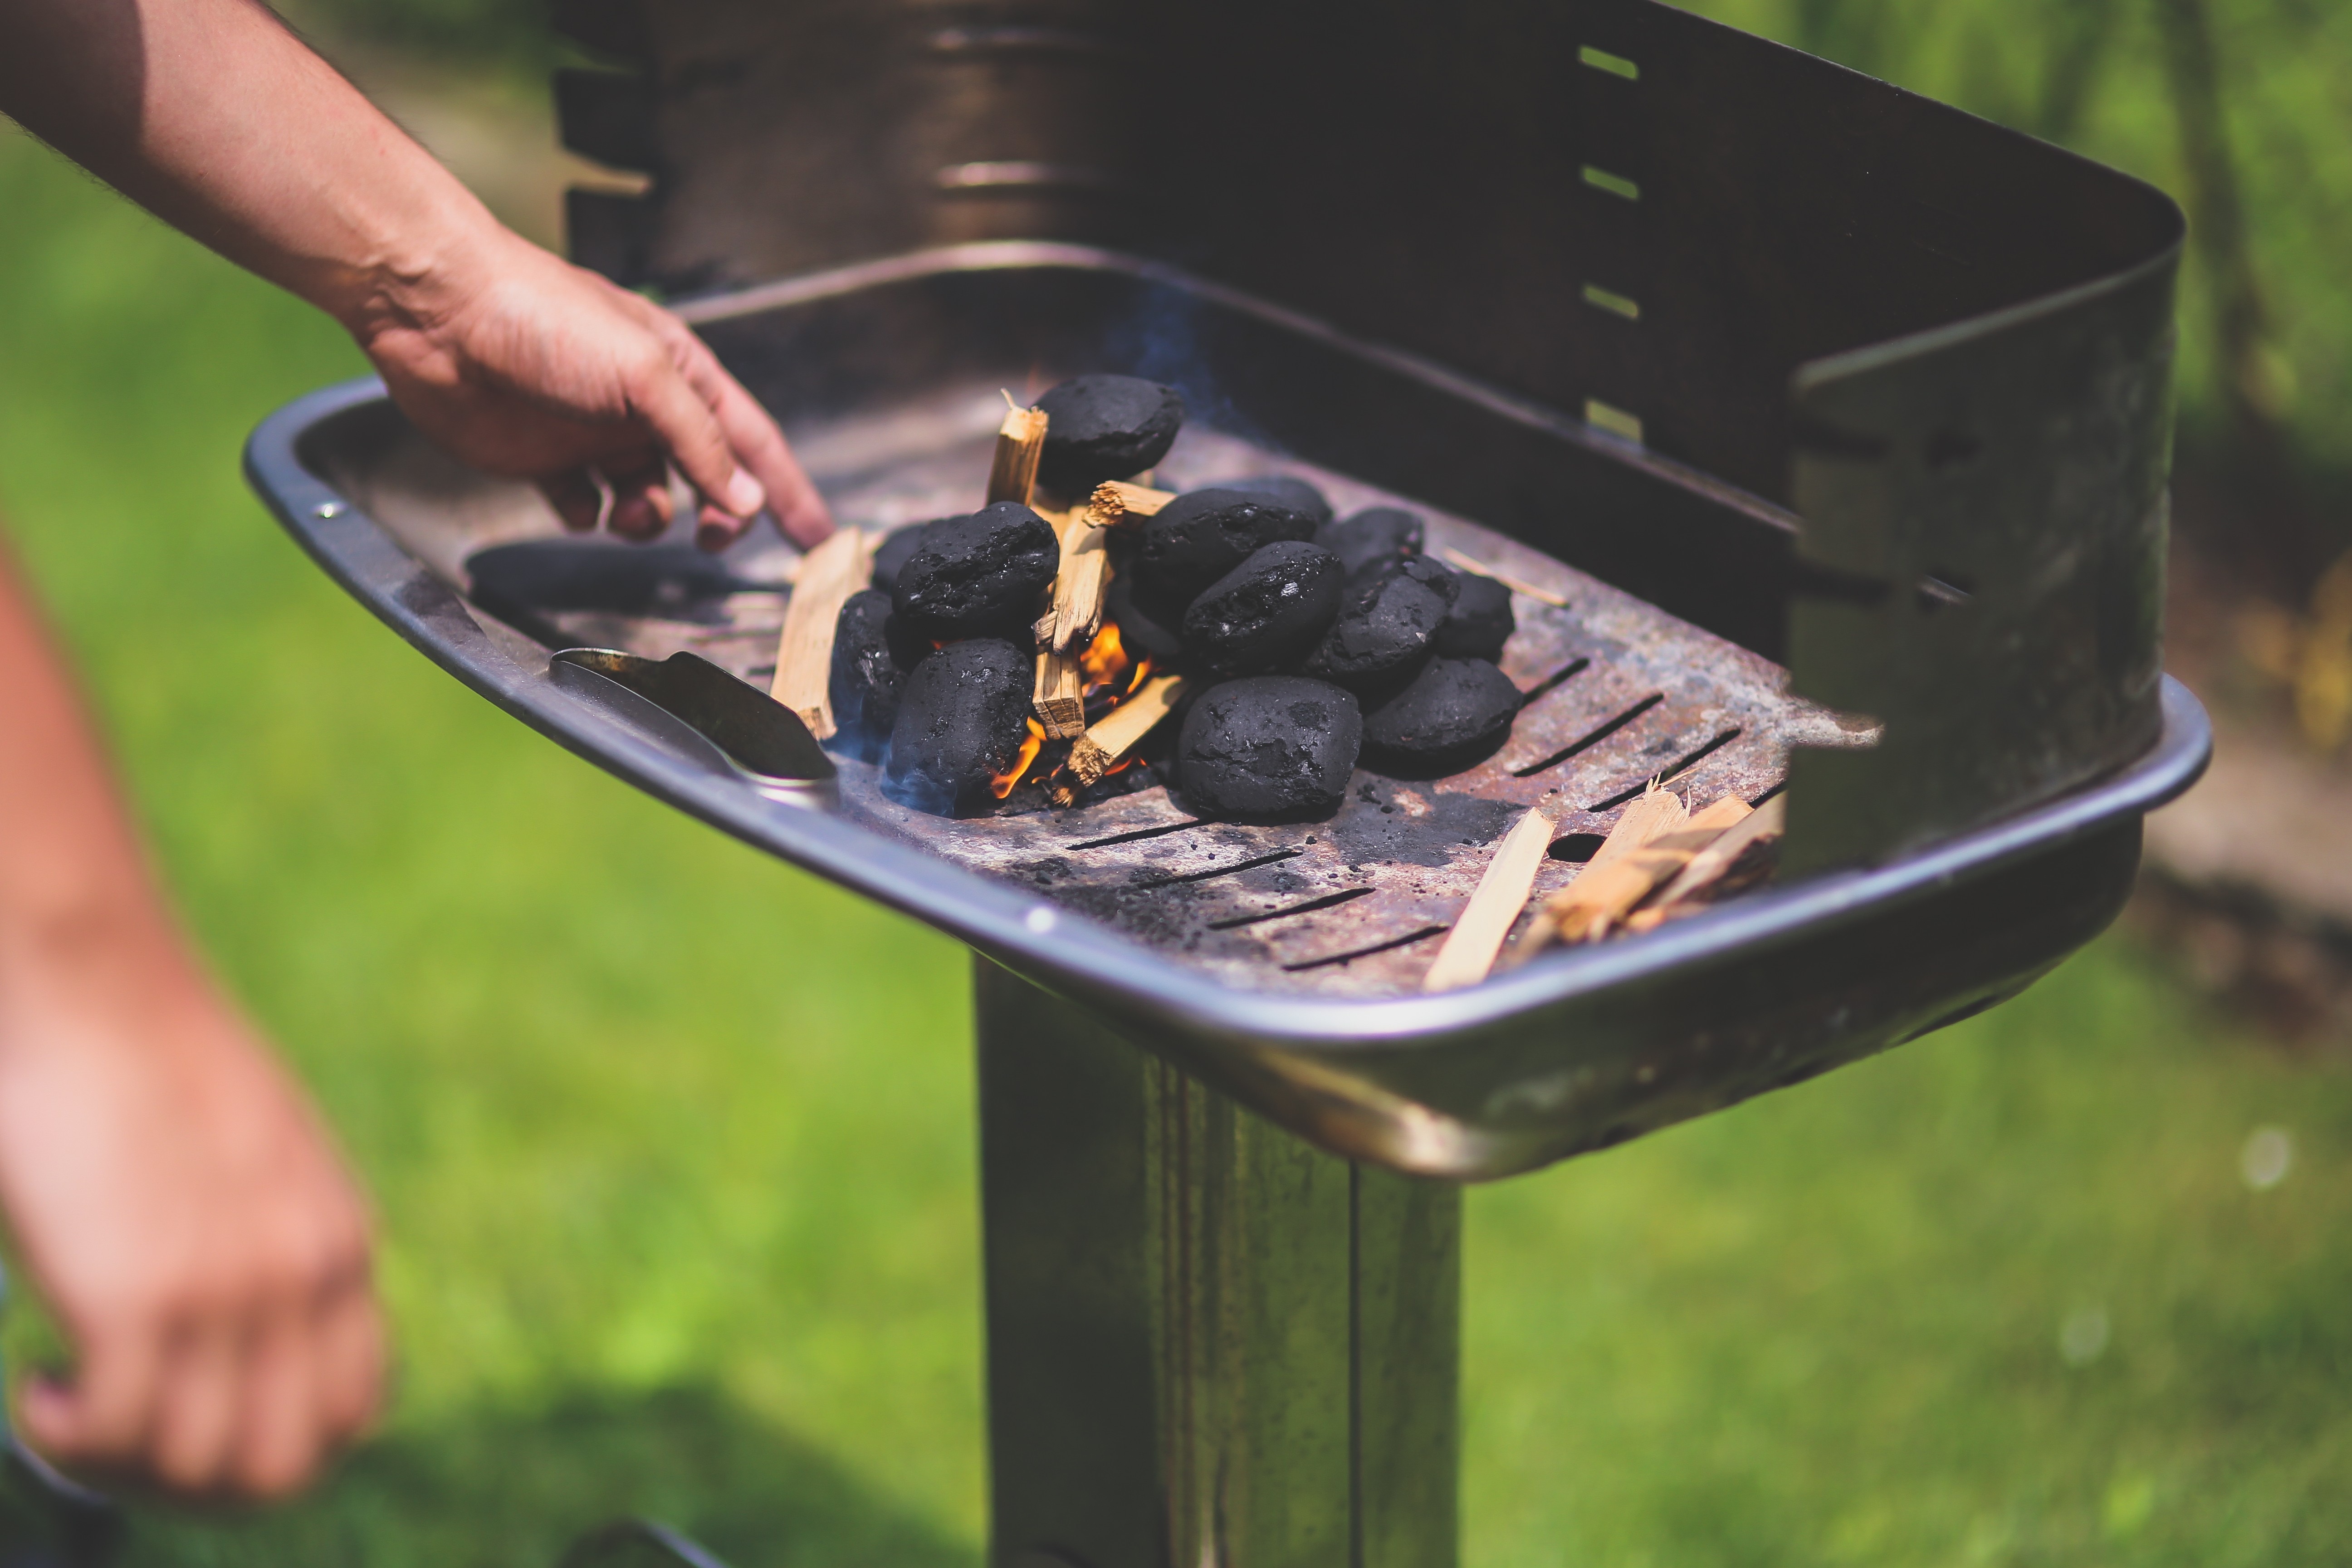 person heating charcoal on grill